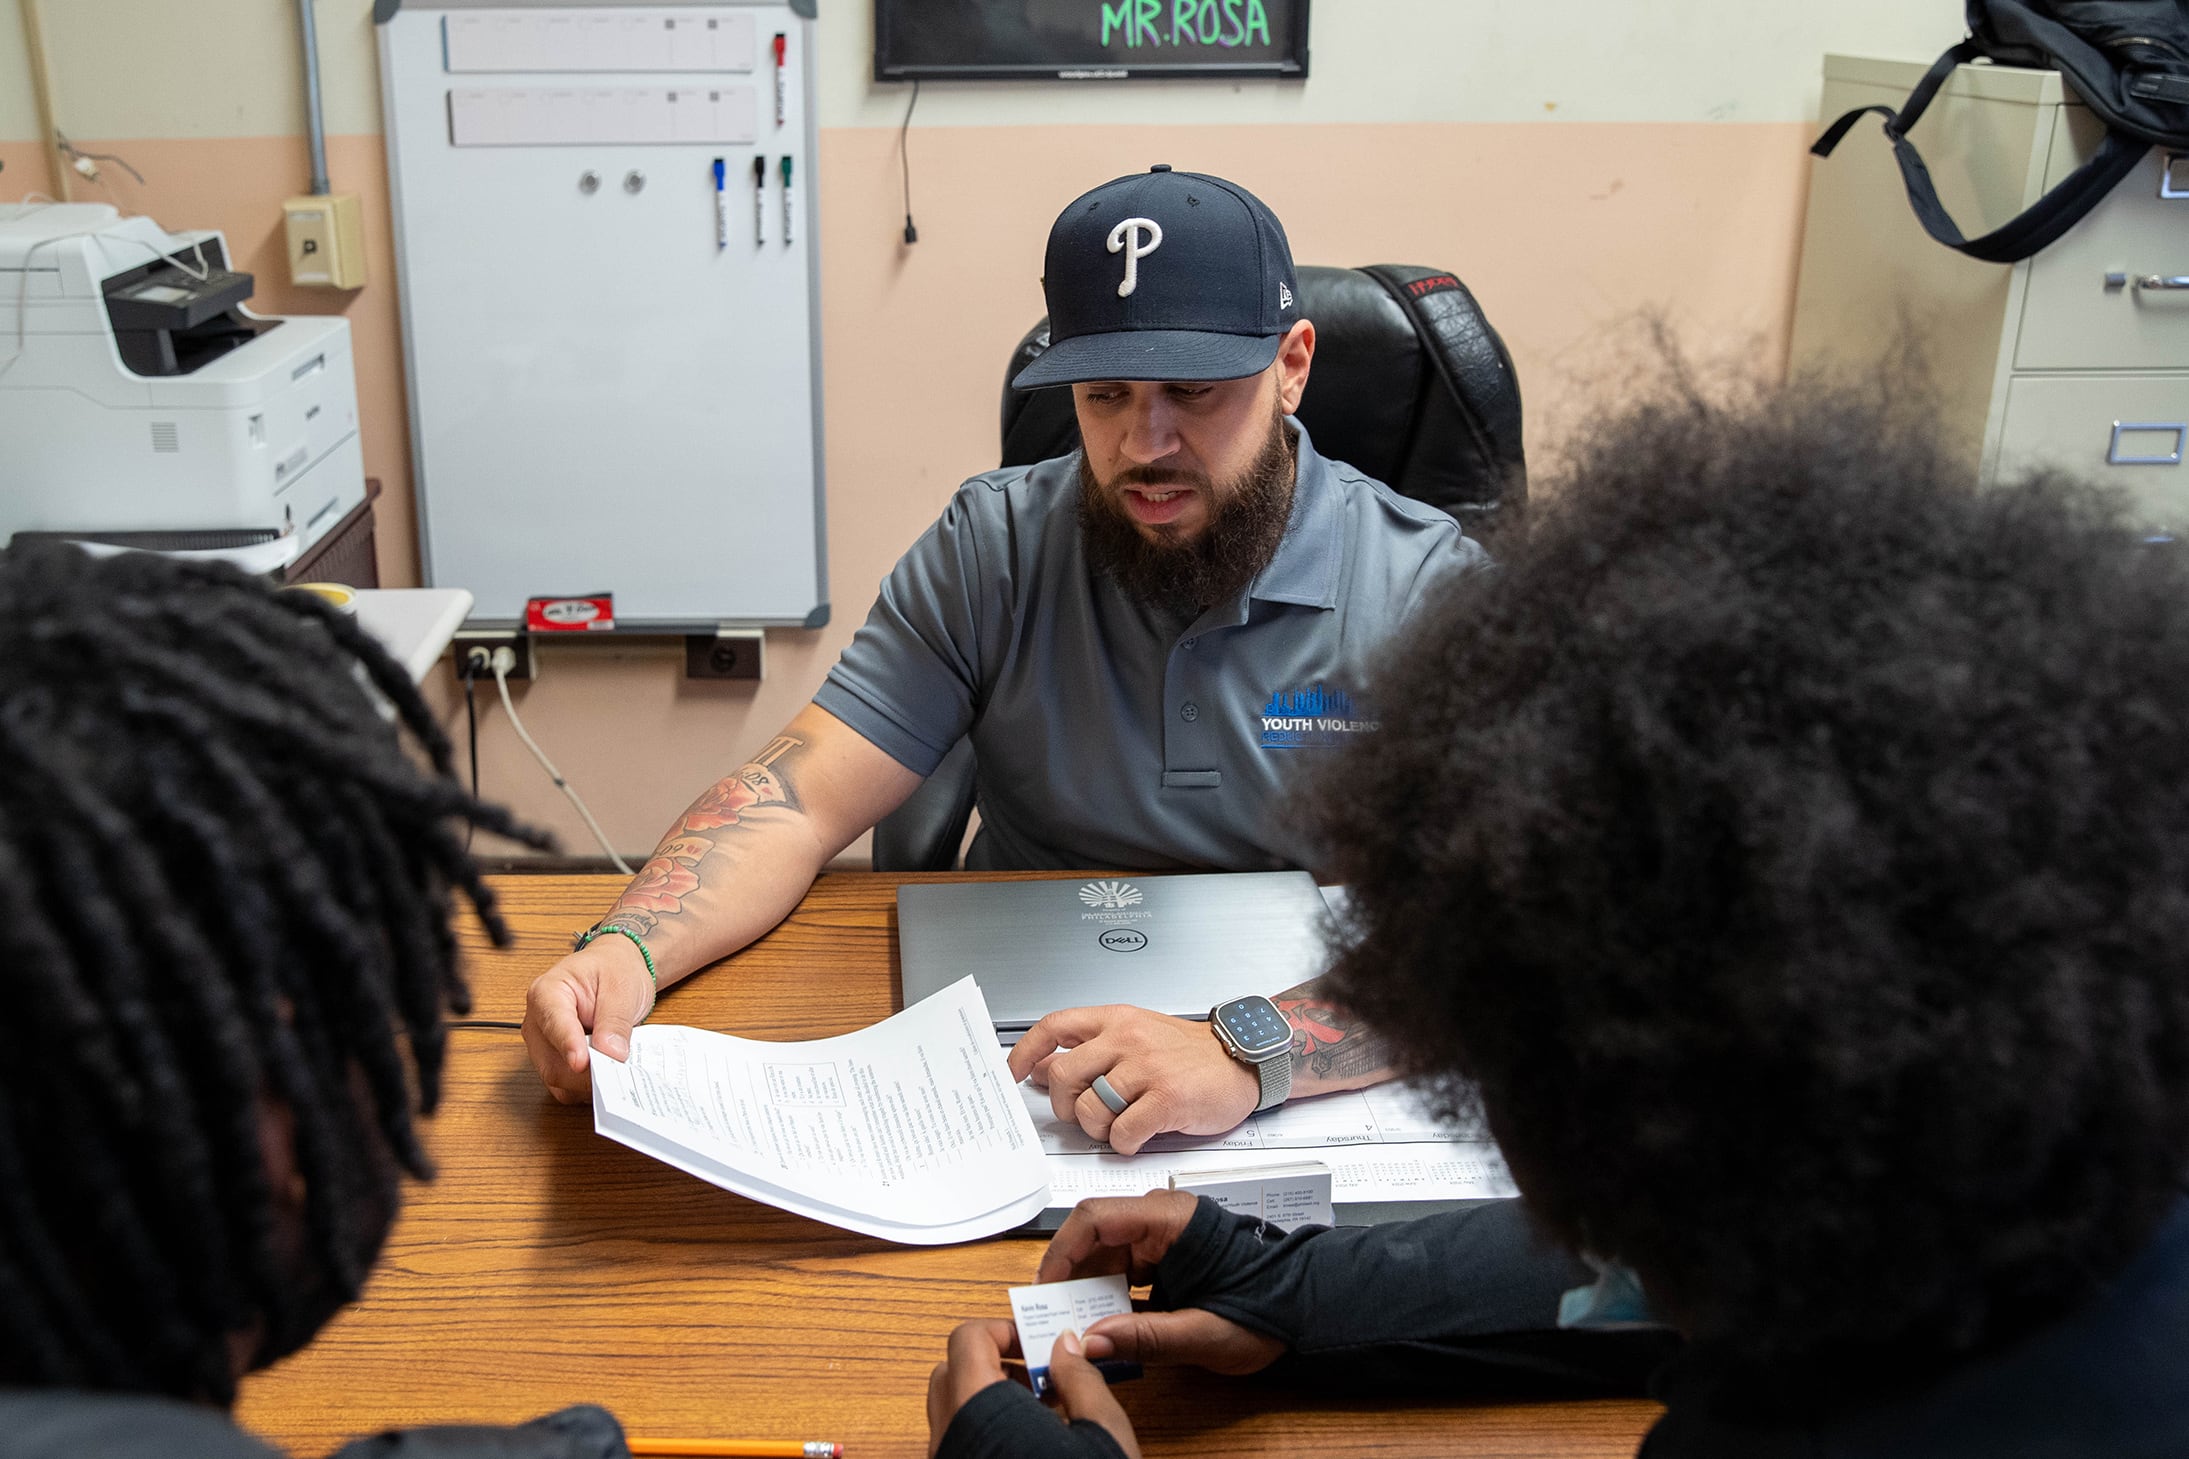 A man wearing a baseball cap and a blue shirt sits behind a wooden desk and talks to two students in a school office.